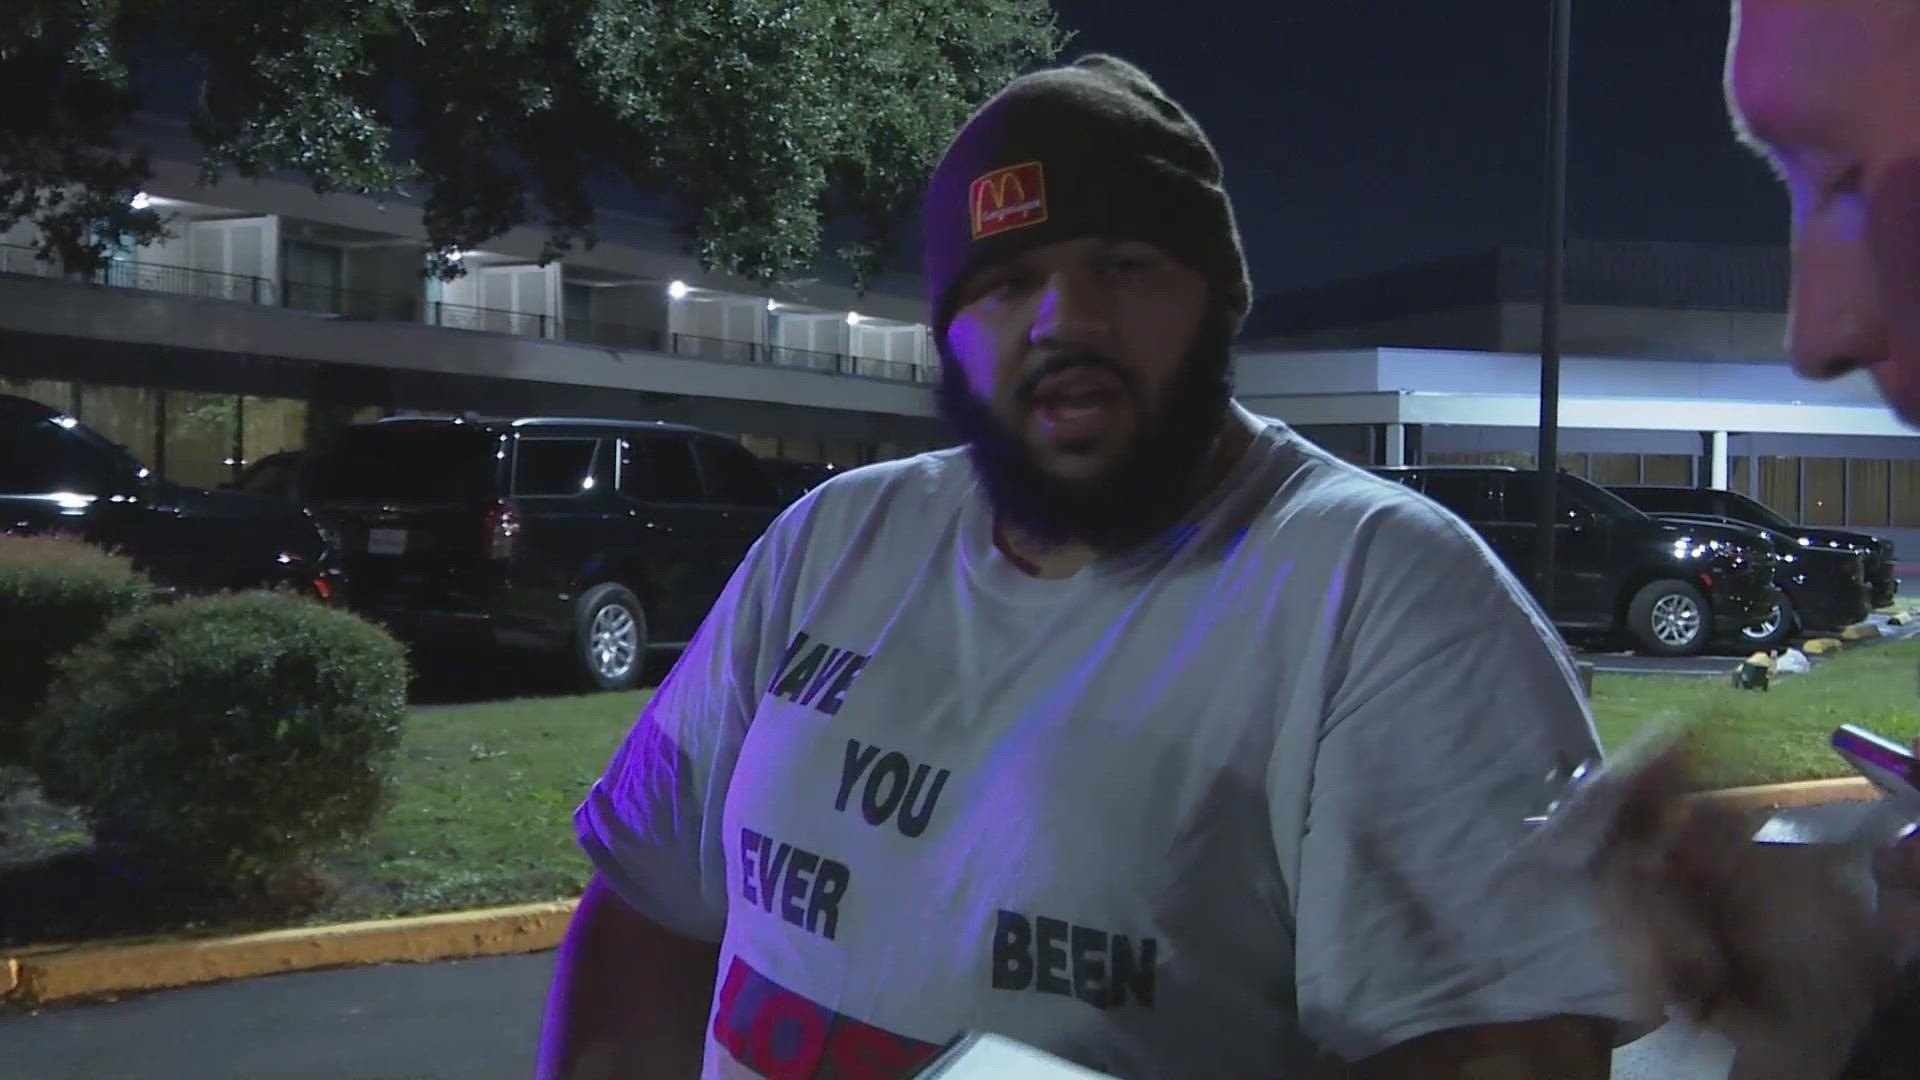 Three people who came to the Astroworld Festival from different parts of the country describe what they saw.